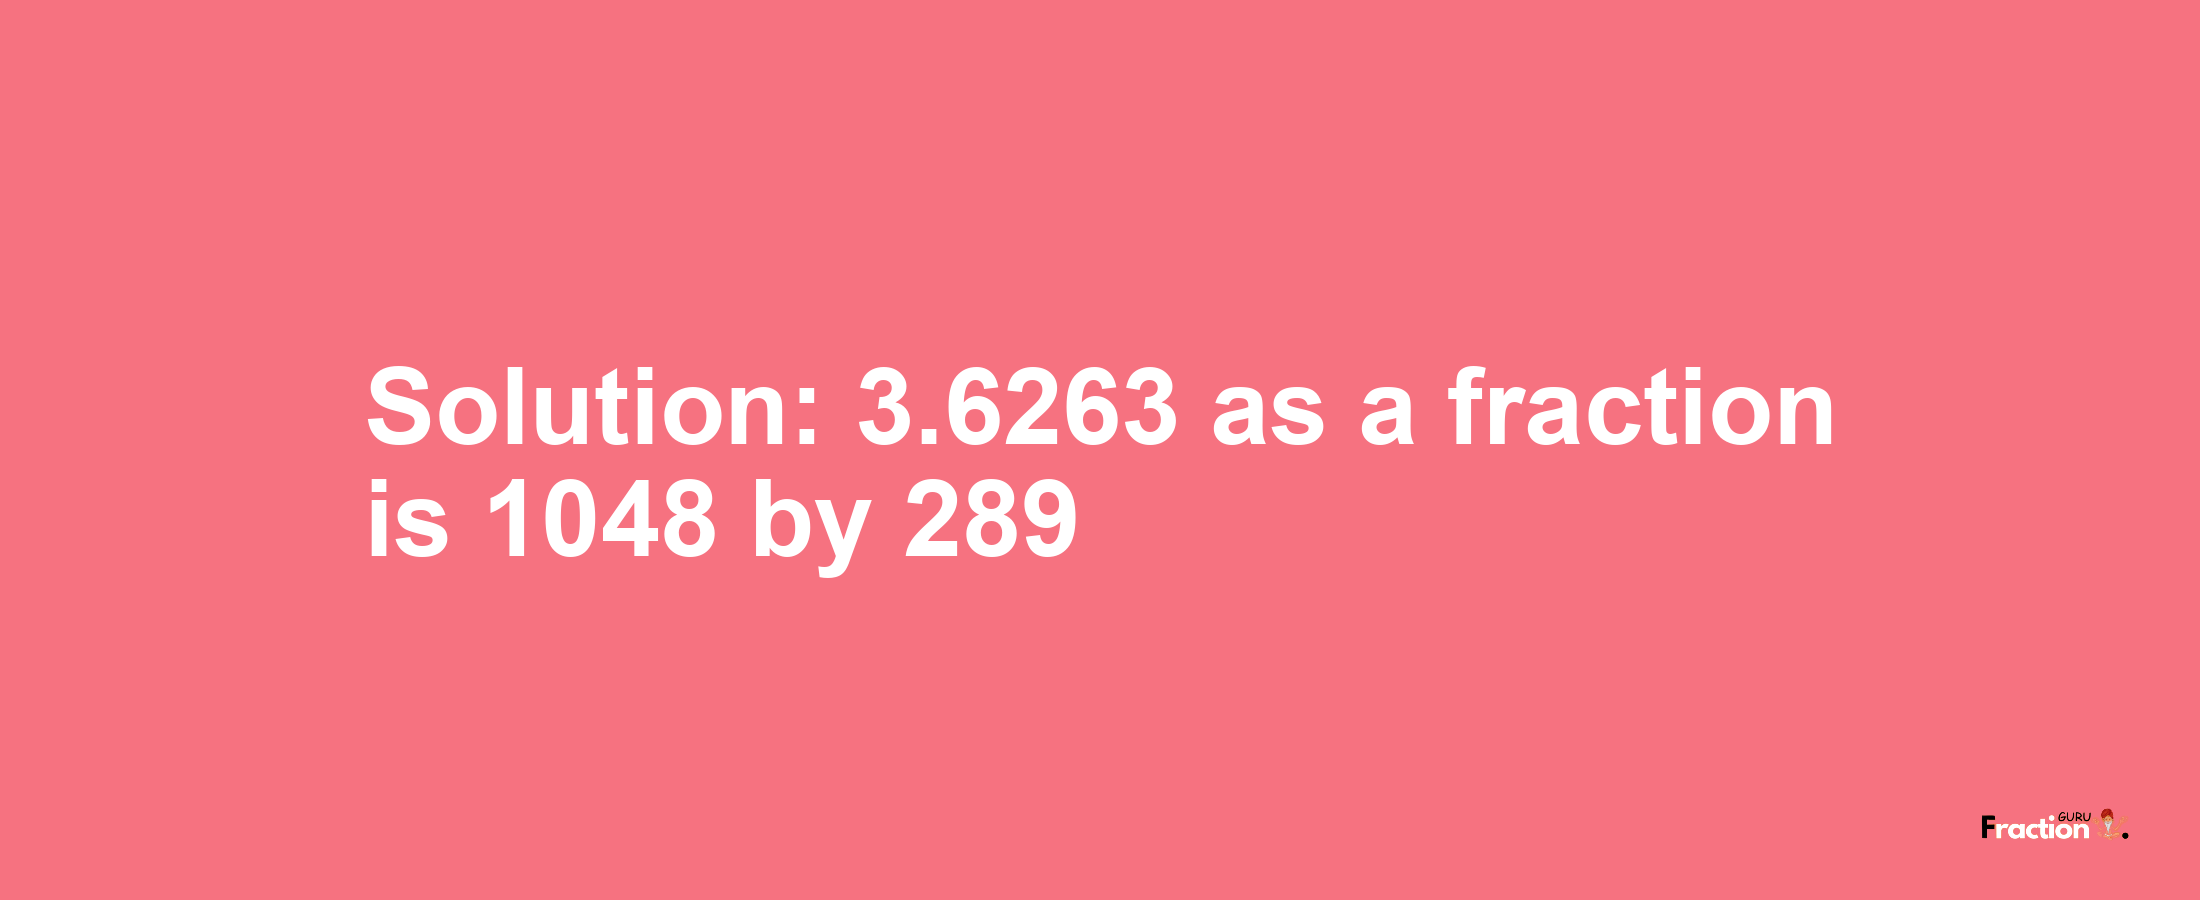 Solution:3.6263 as a fraction is 1048/289